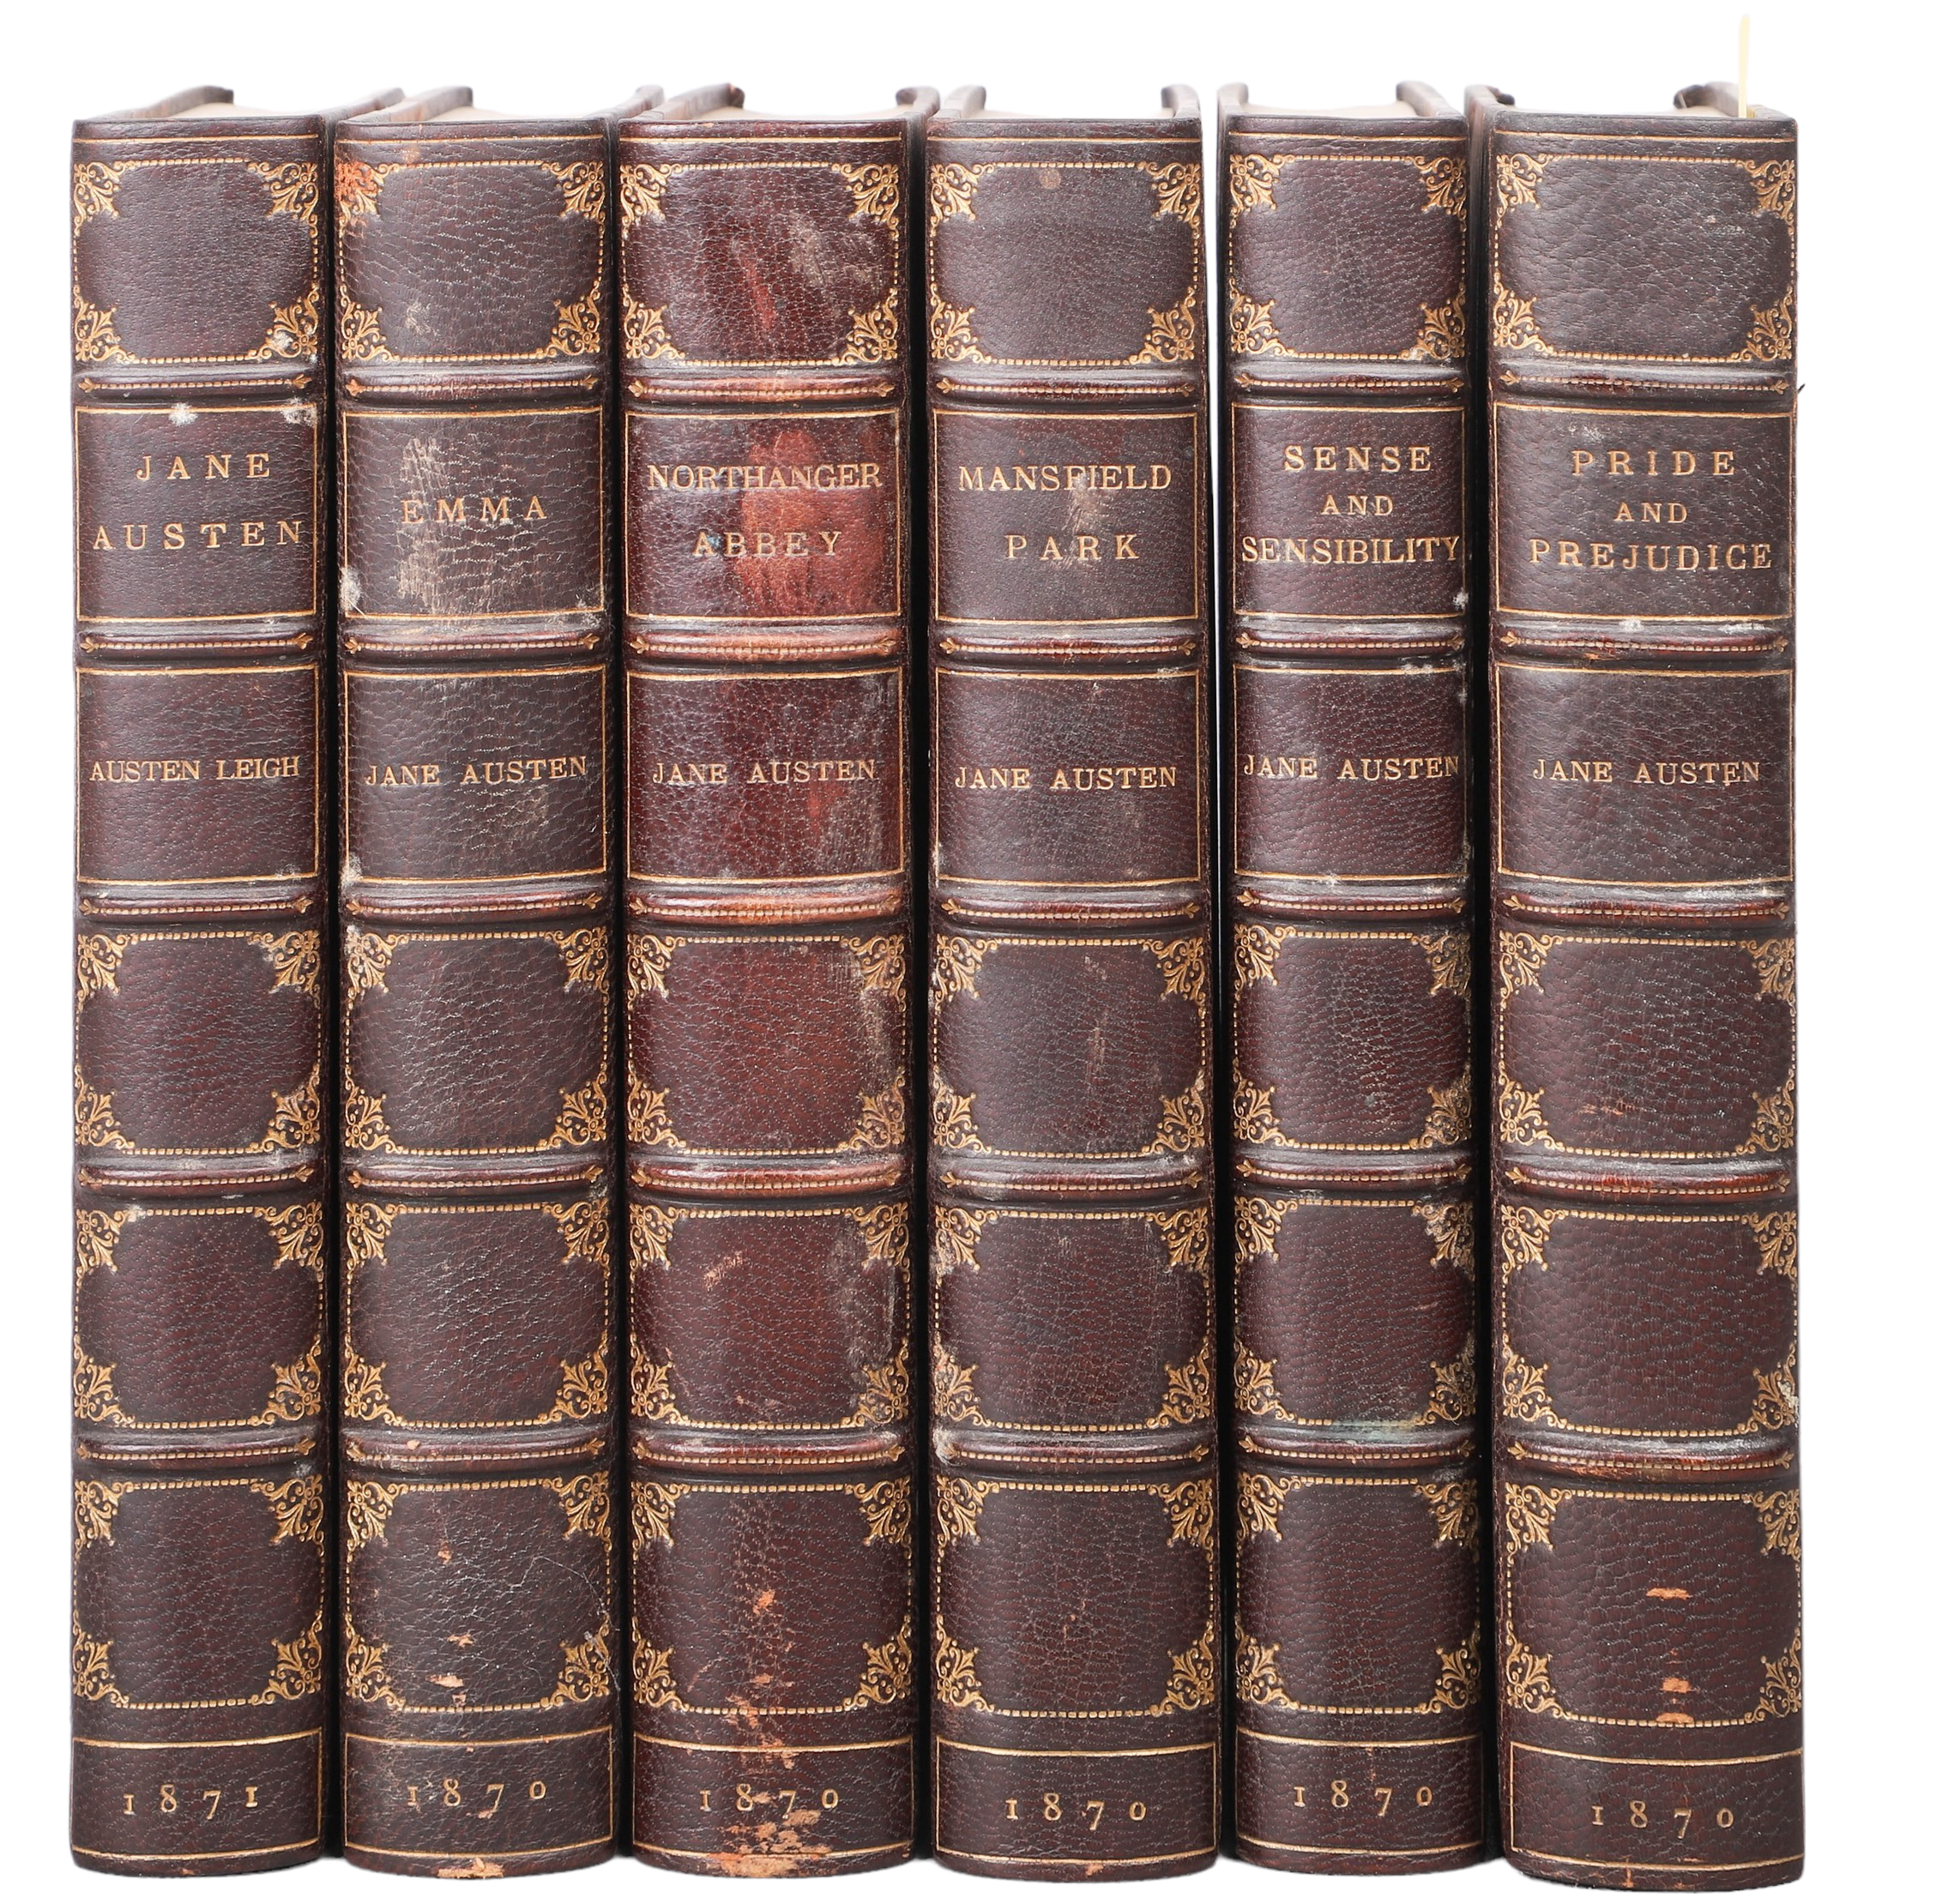 Six identically bound volumes in 27a484